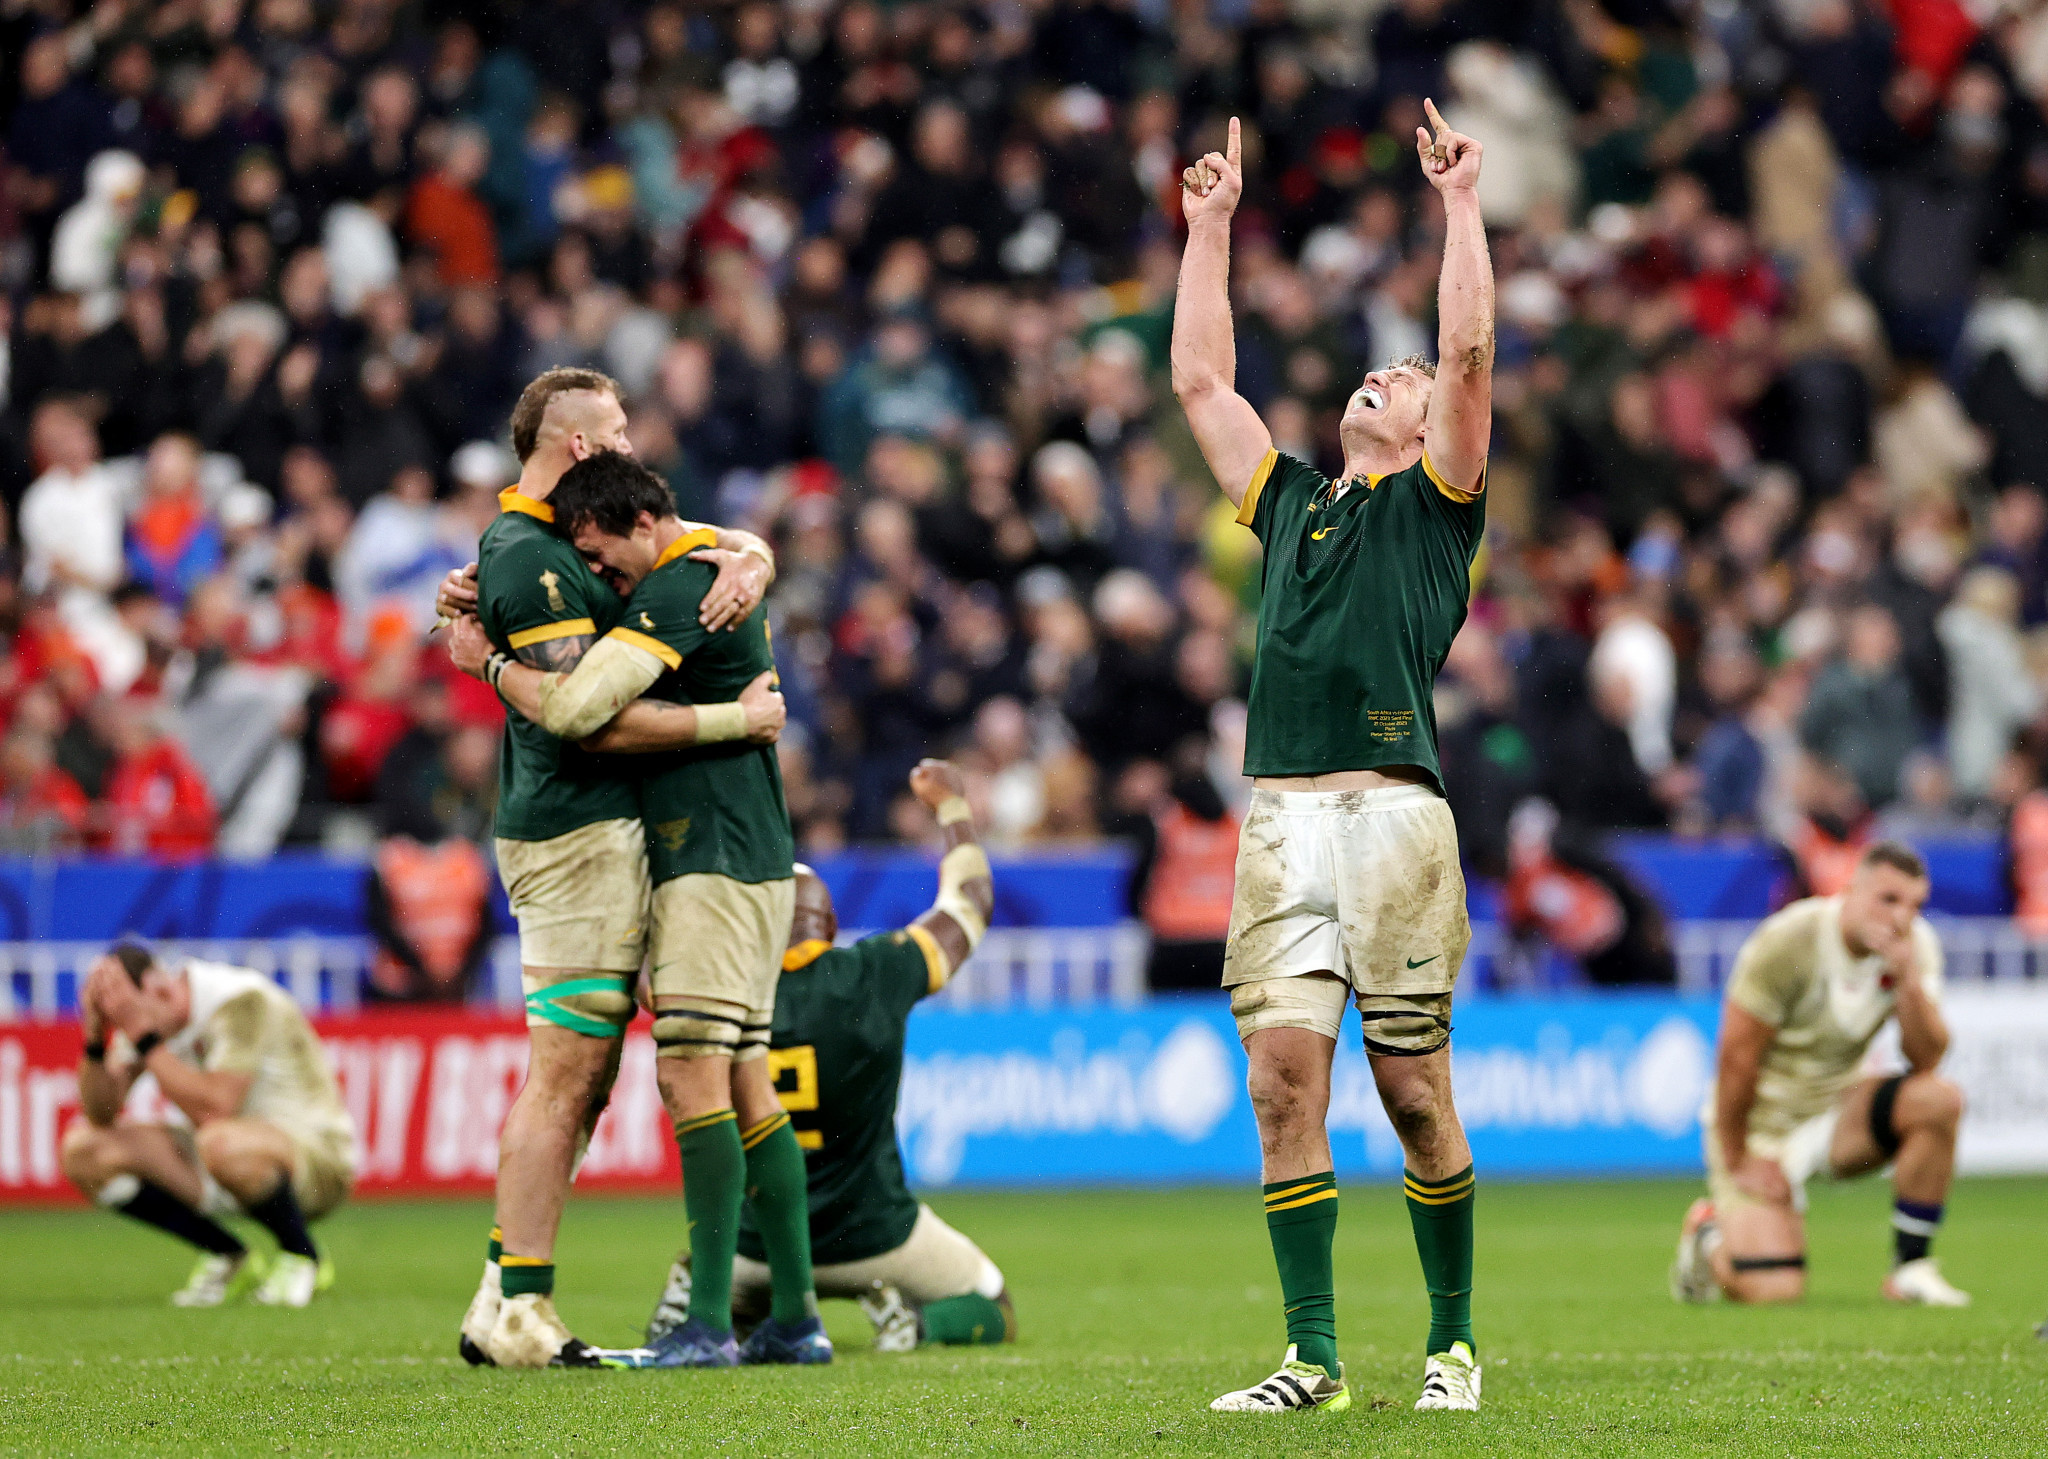 South Africa edged England 16-15 in a tense Rugby World Cup semi-final on Saturday ©Getty Images